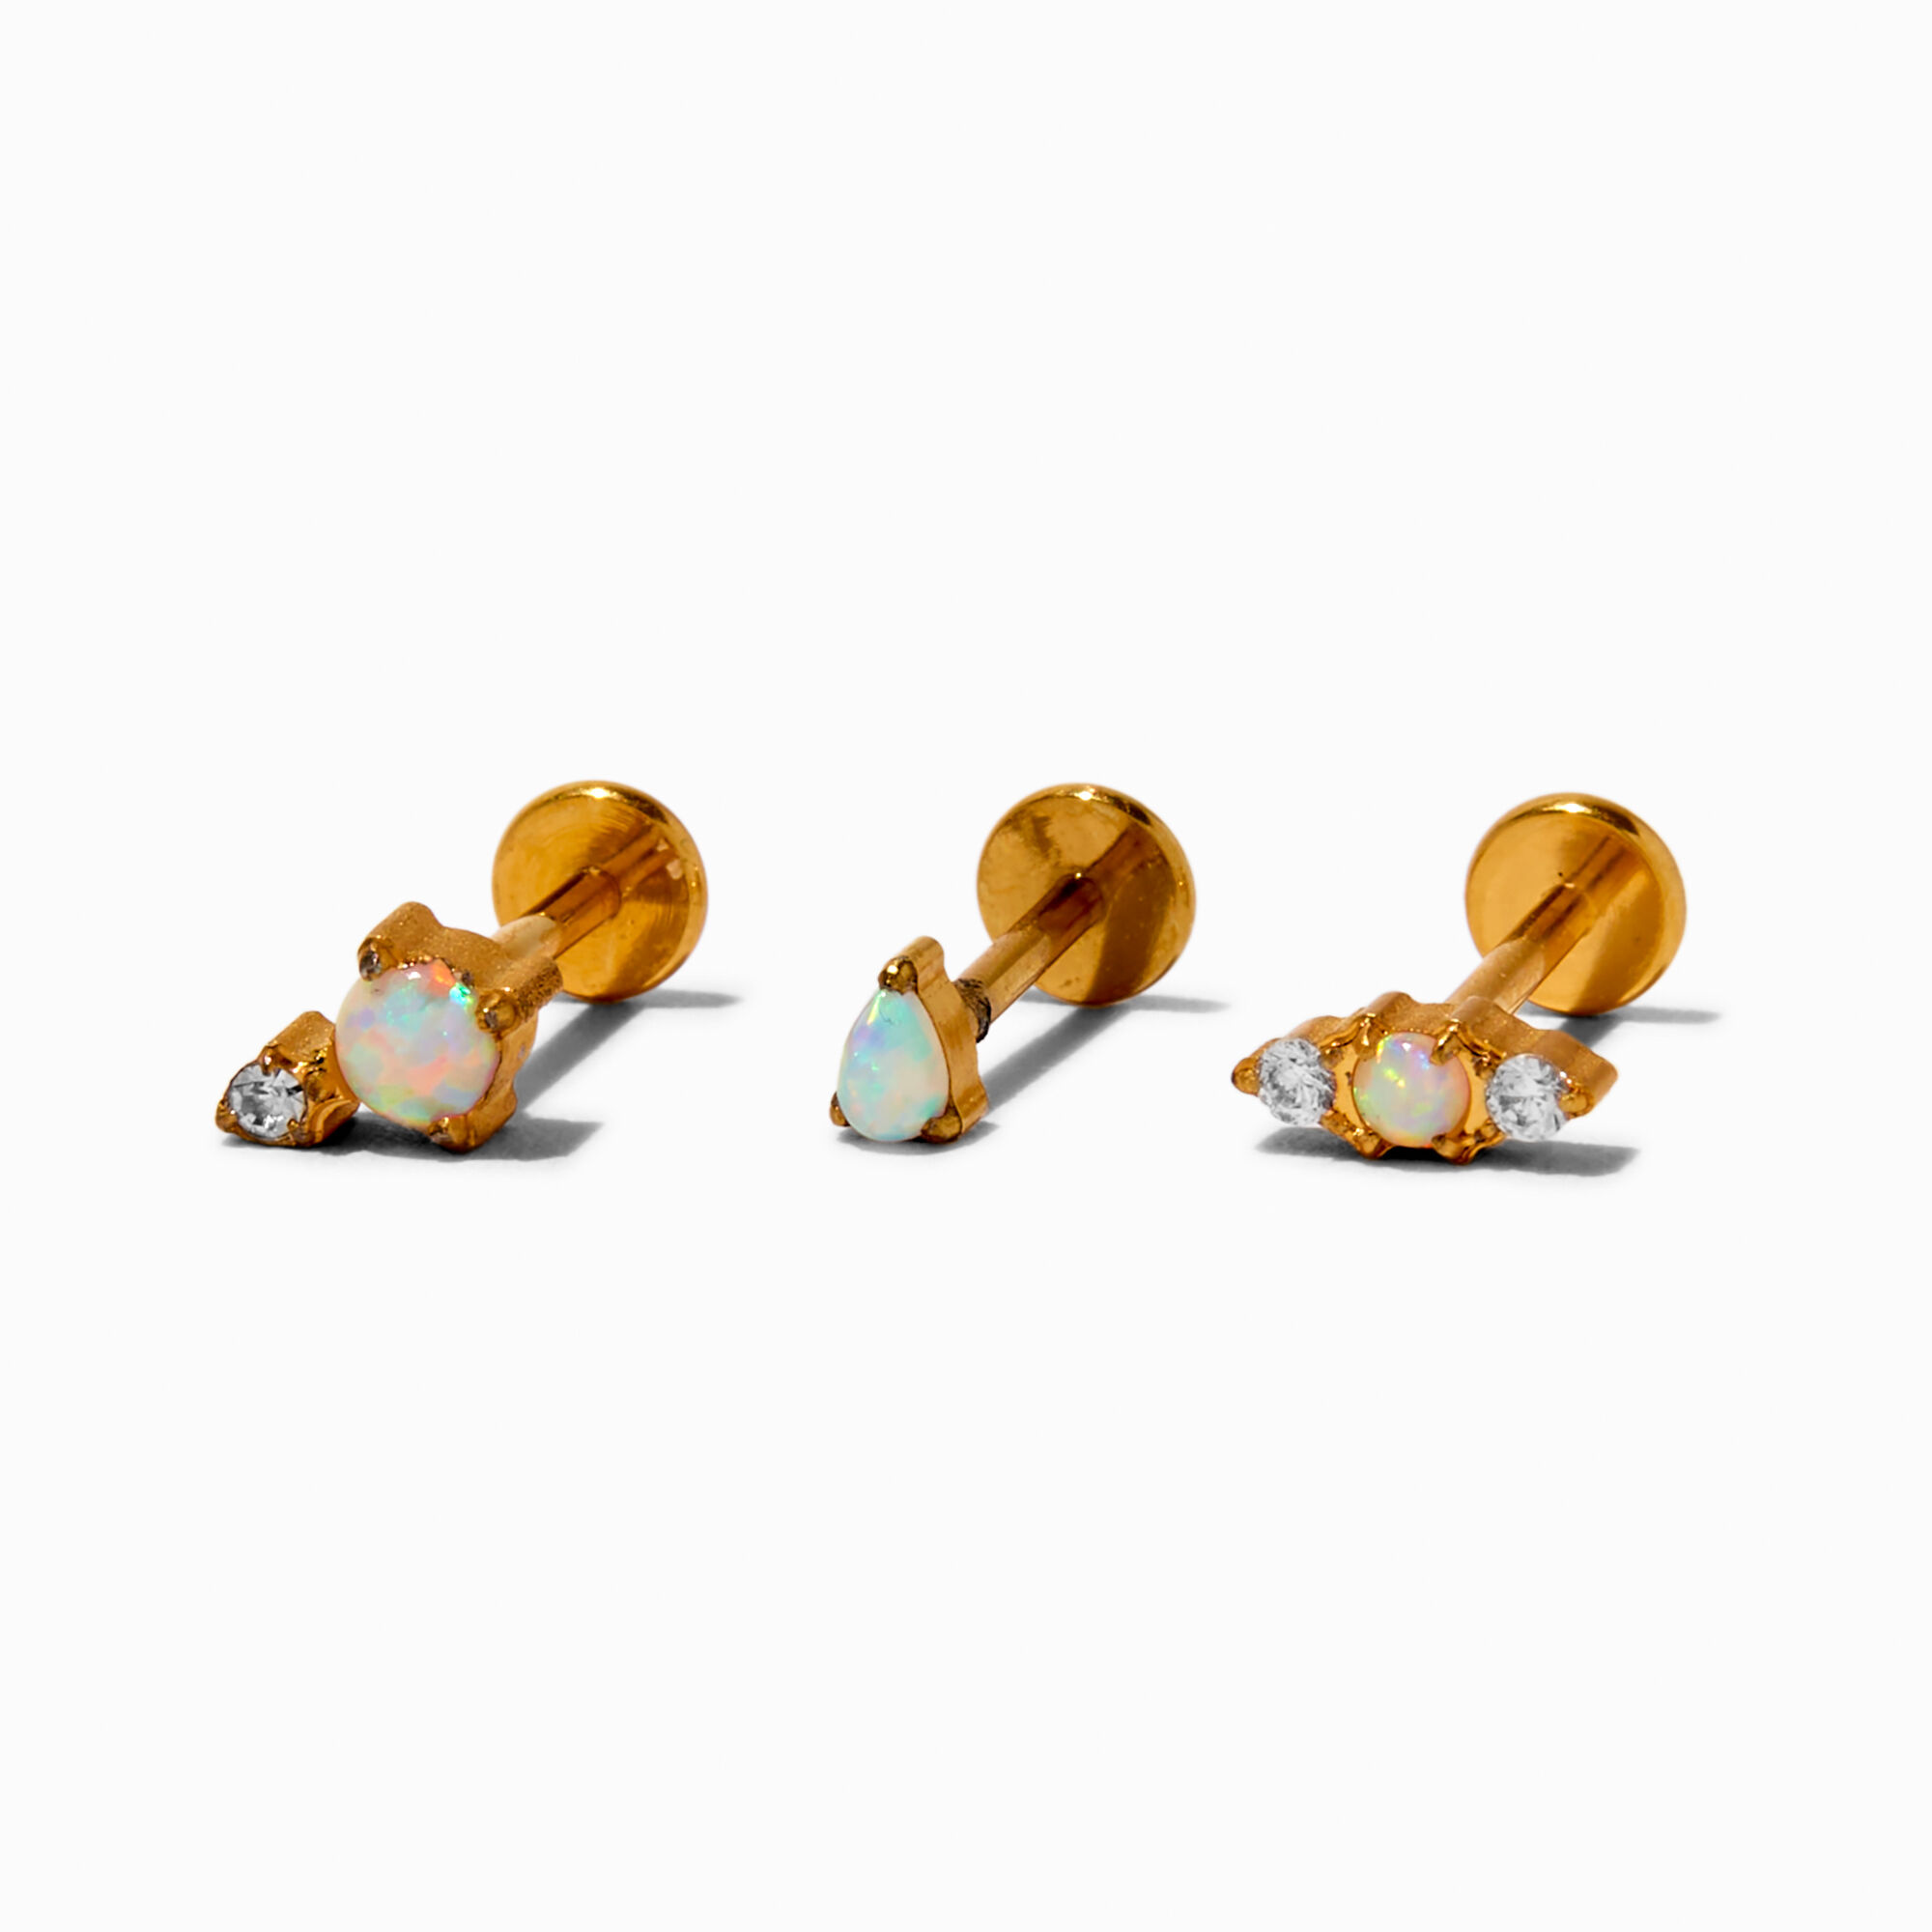 View Claires Tone Titanium Opal 18G Stud Flat Back Cartilage Earrings 3 Pack Gold information